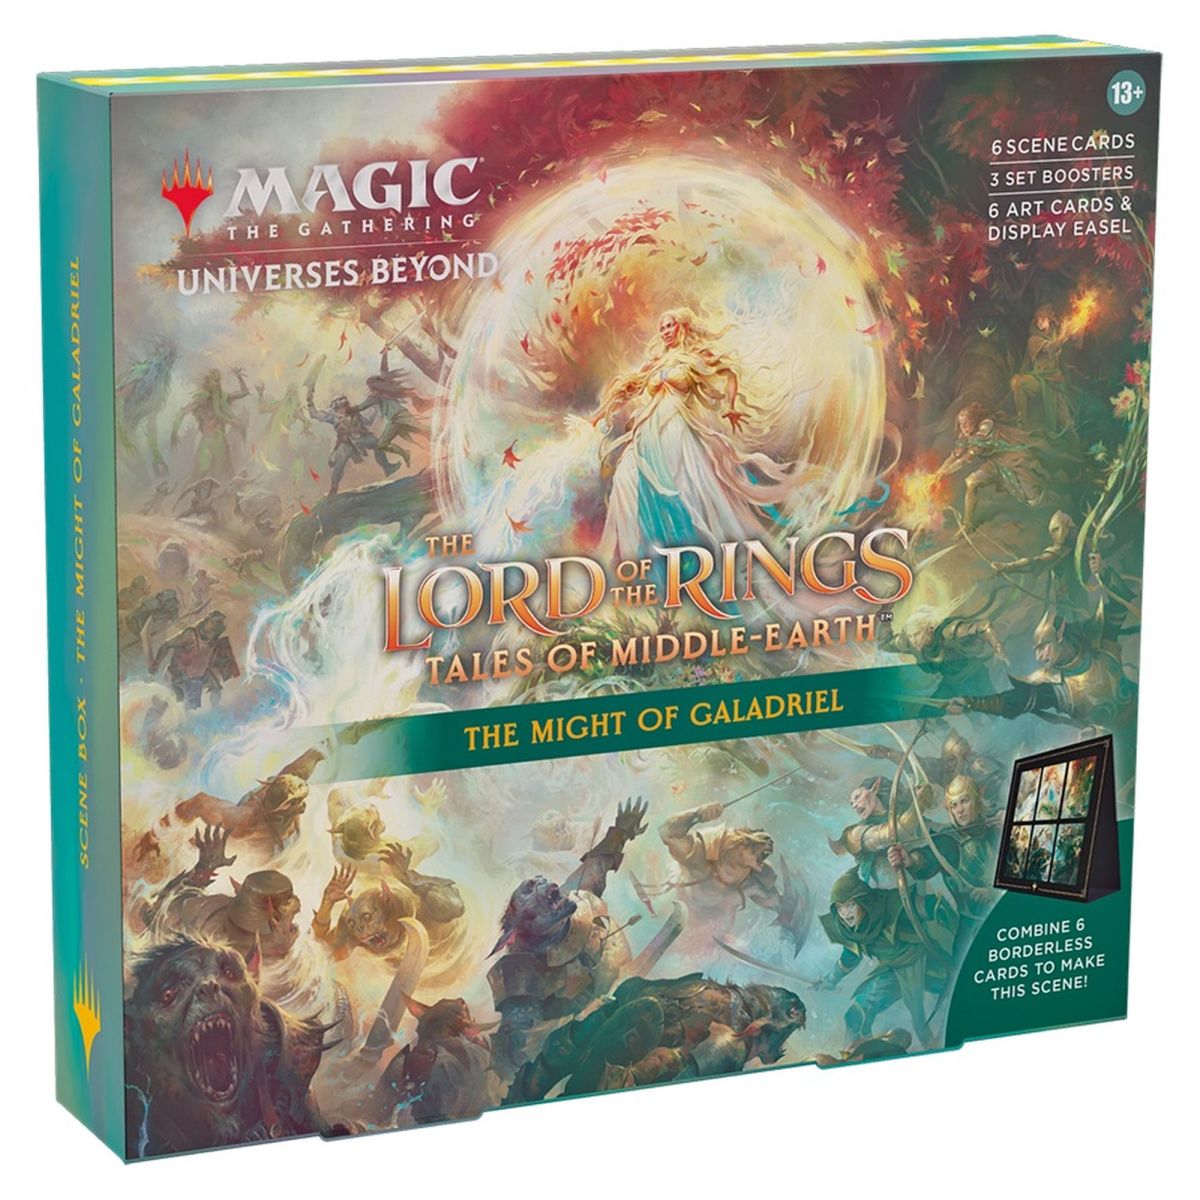 Magic The Gathering - Scene Box - The Lord of the Rings: Tales of Middle-earth - The Might of Galadriel - EN